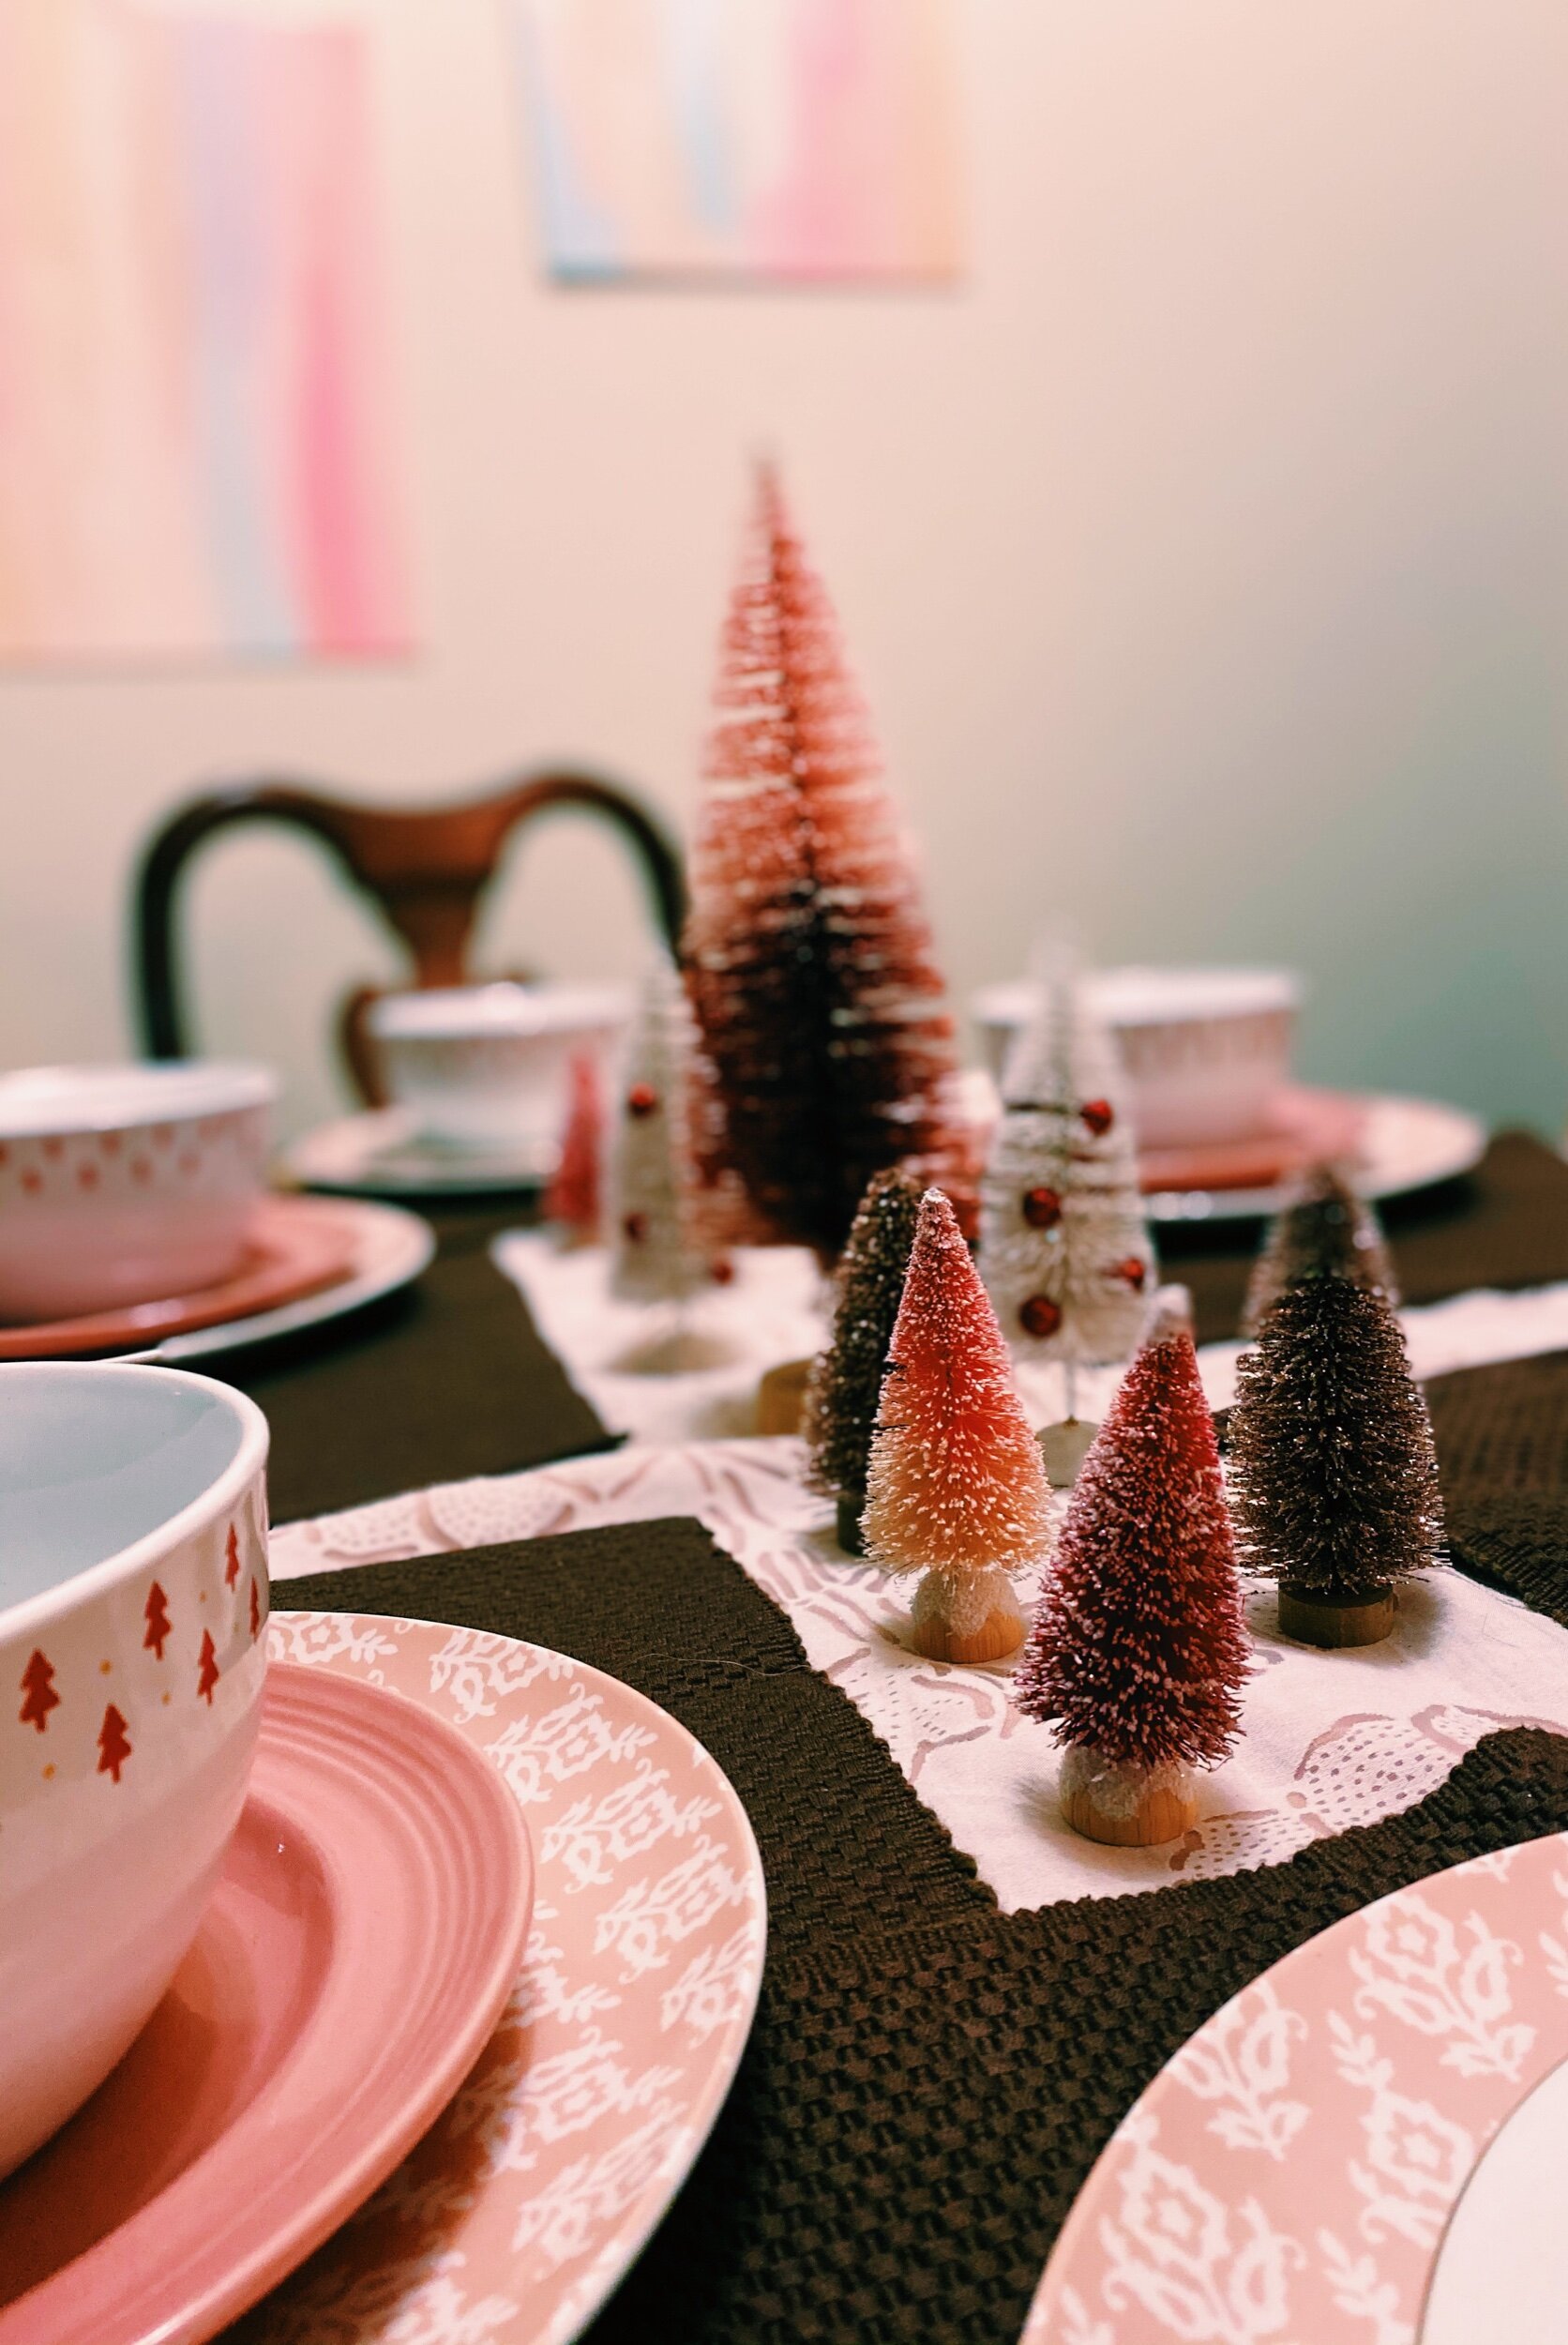 Three Heel Clicks - Adding Holiday Touches to Your Table